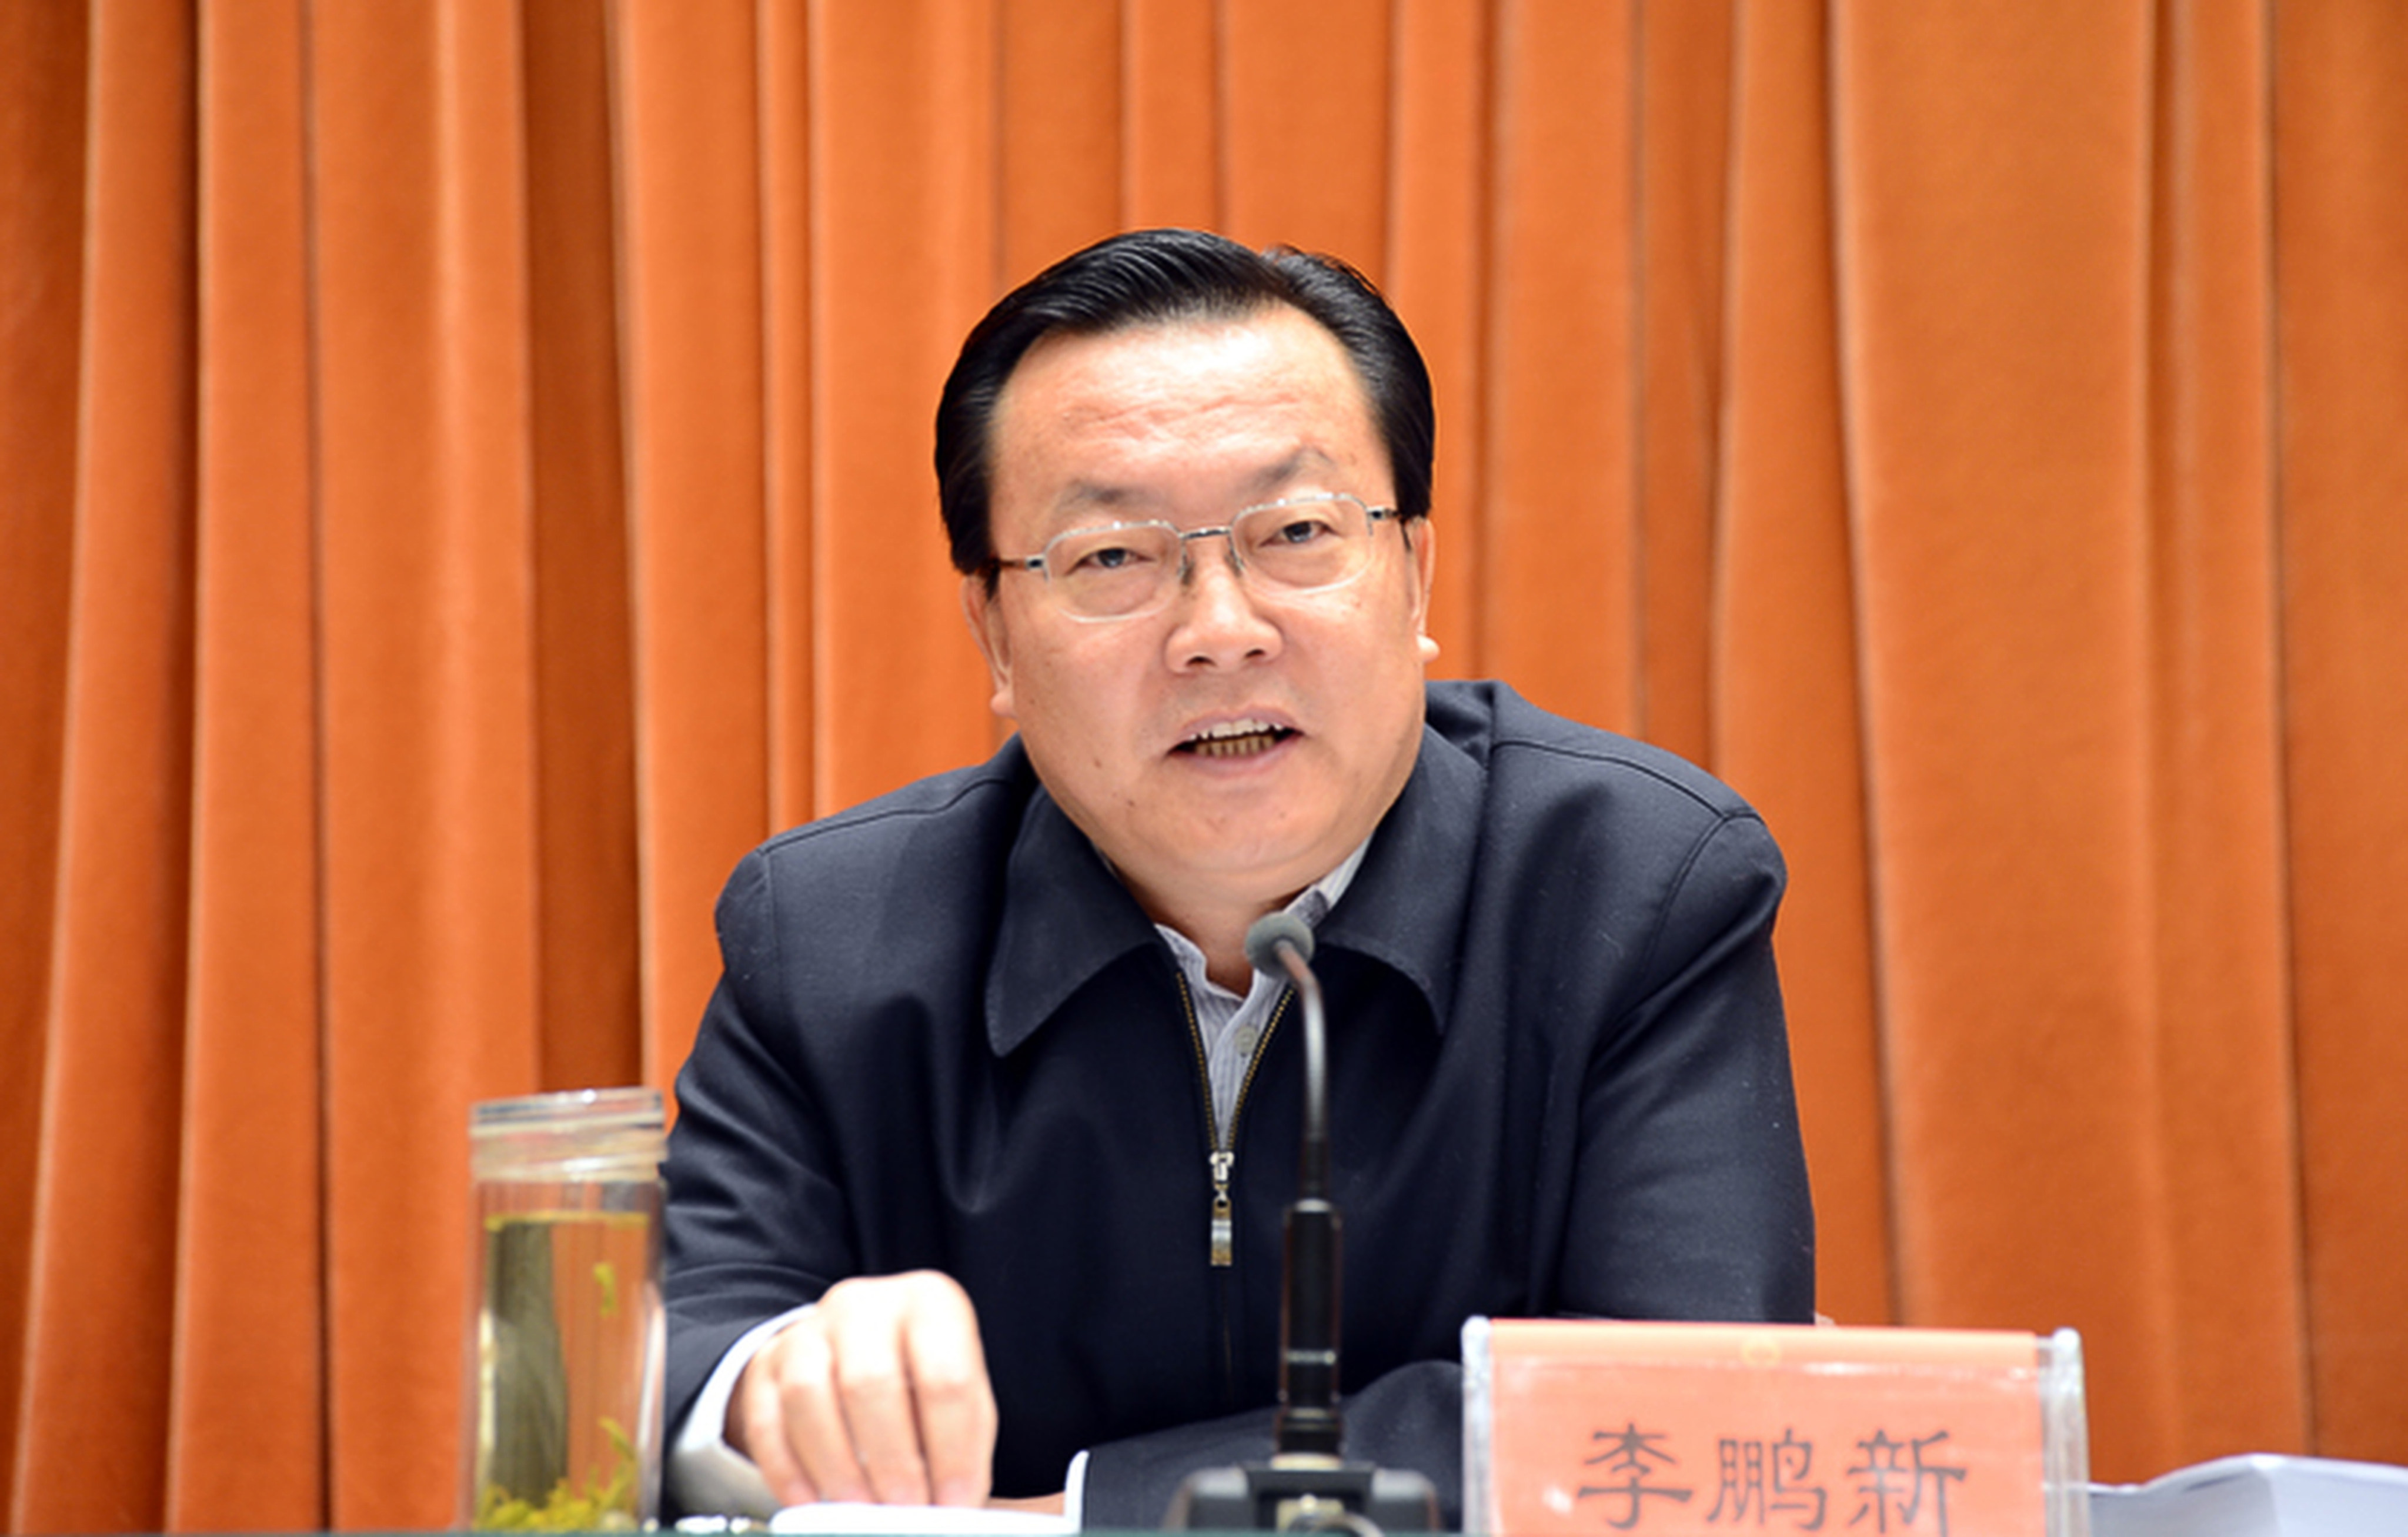 Li Pengxin is being investigated by China’s top anti-corruption watchdog. Photo: Handout